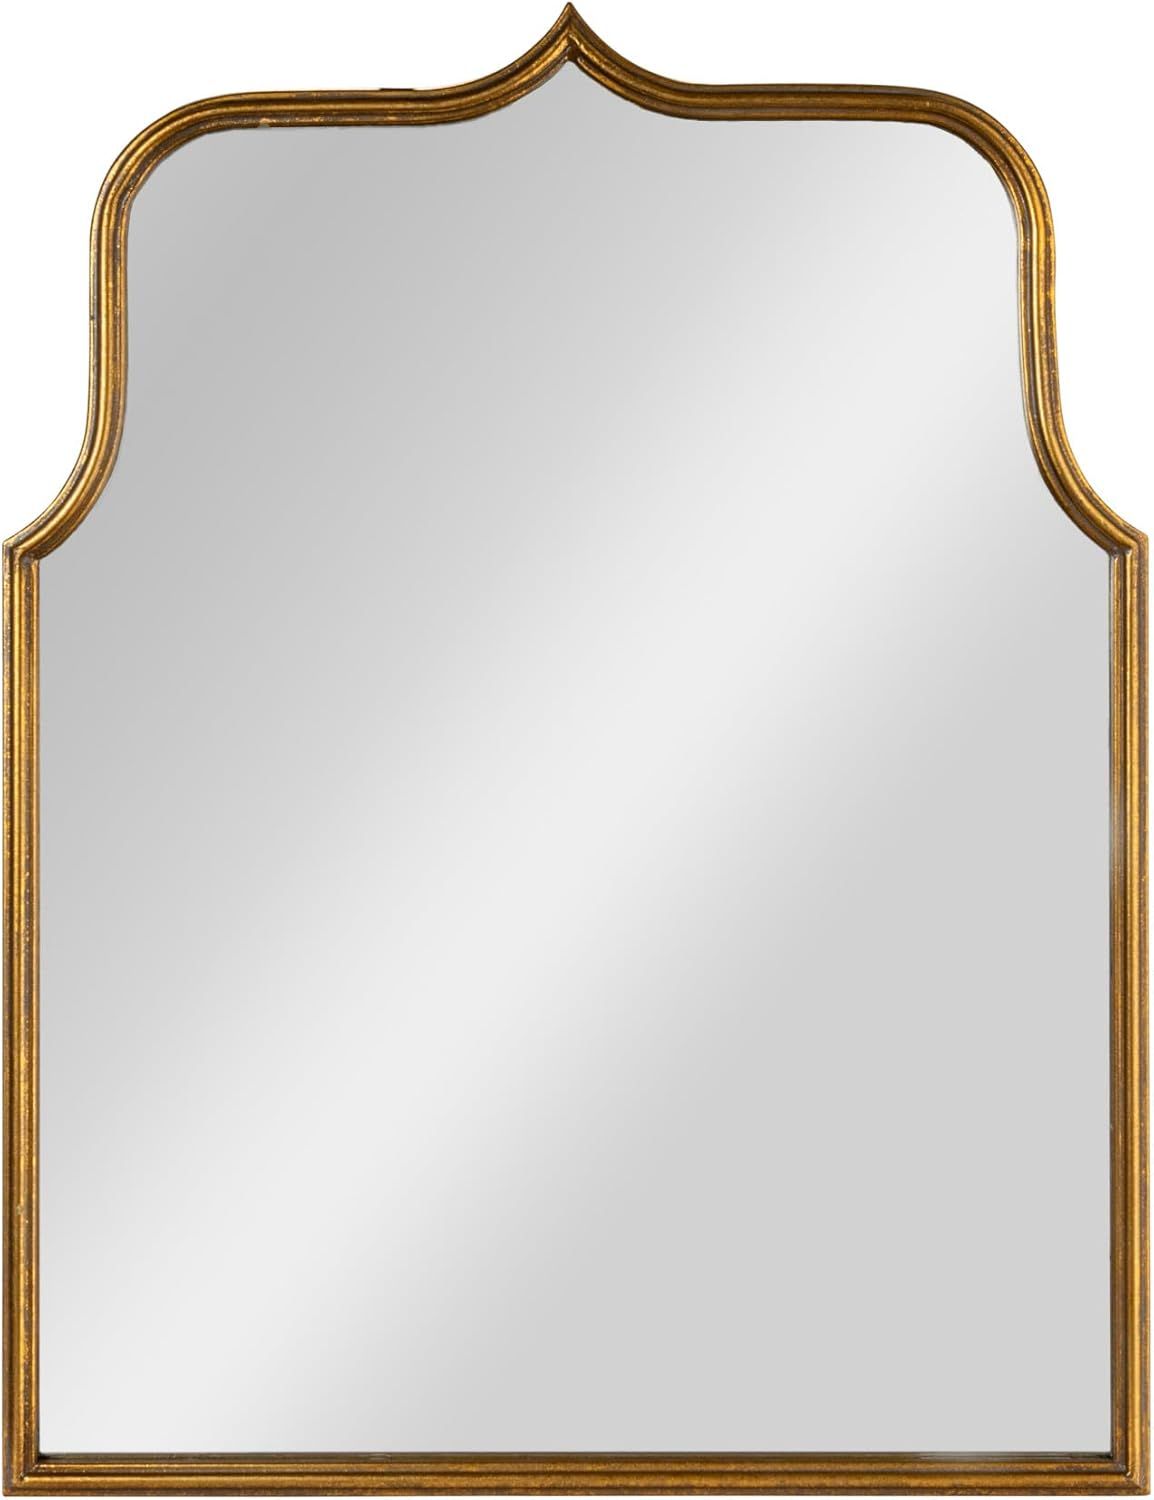 Creative Co-Op Arched Metal Framed Wall Mirror, Antique Goldleaf | Amazon (US)